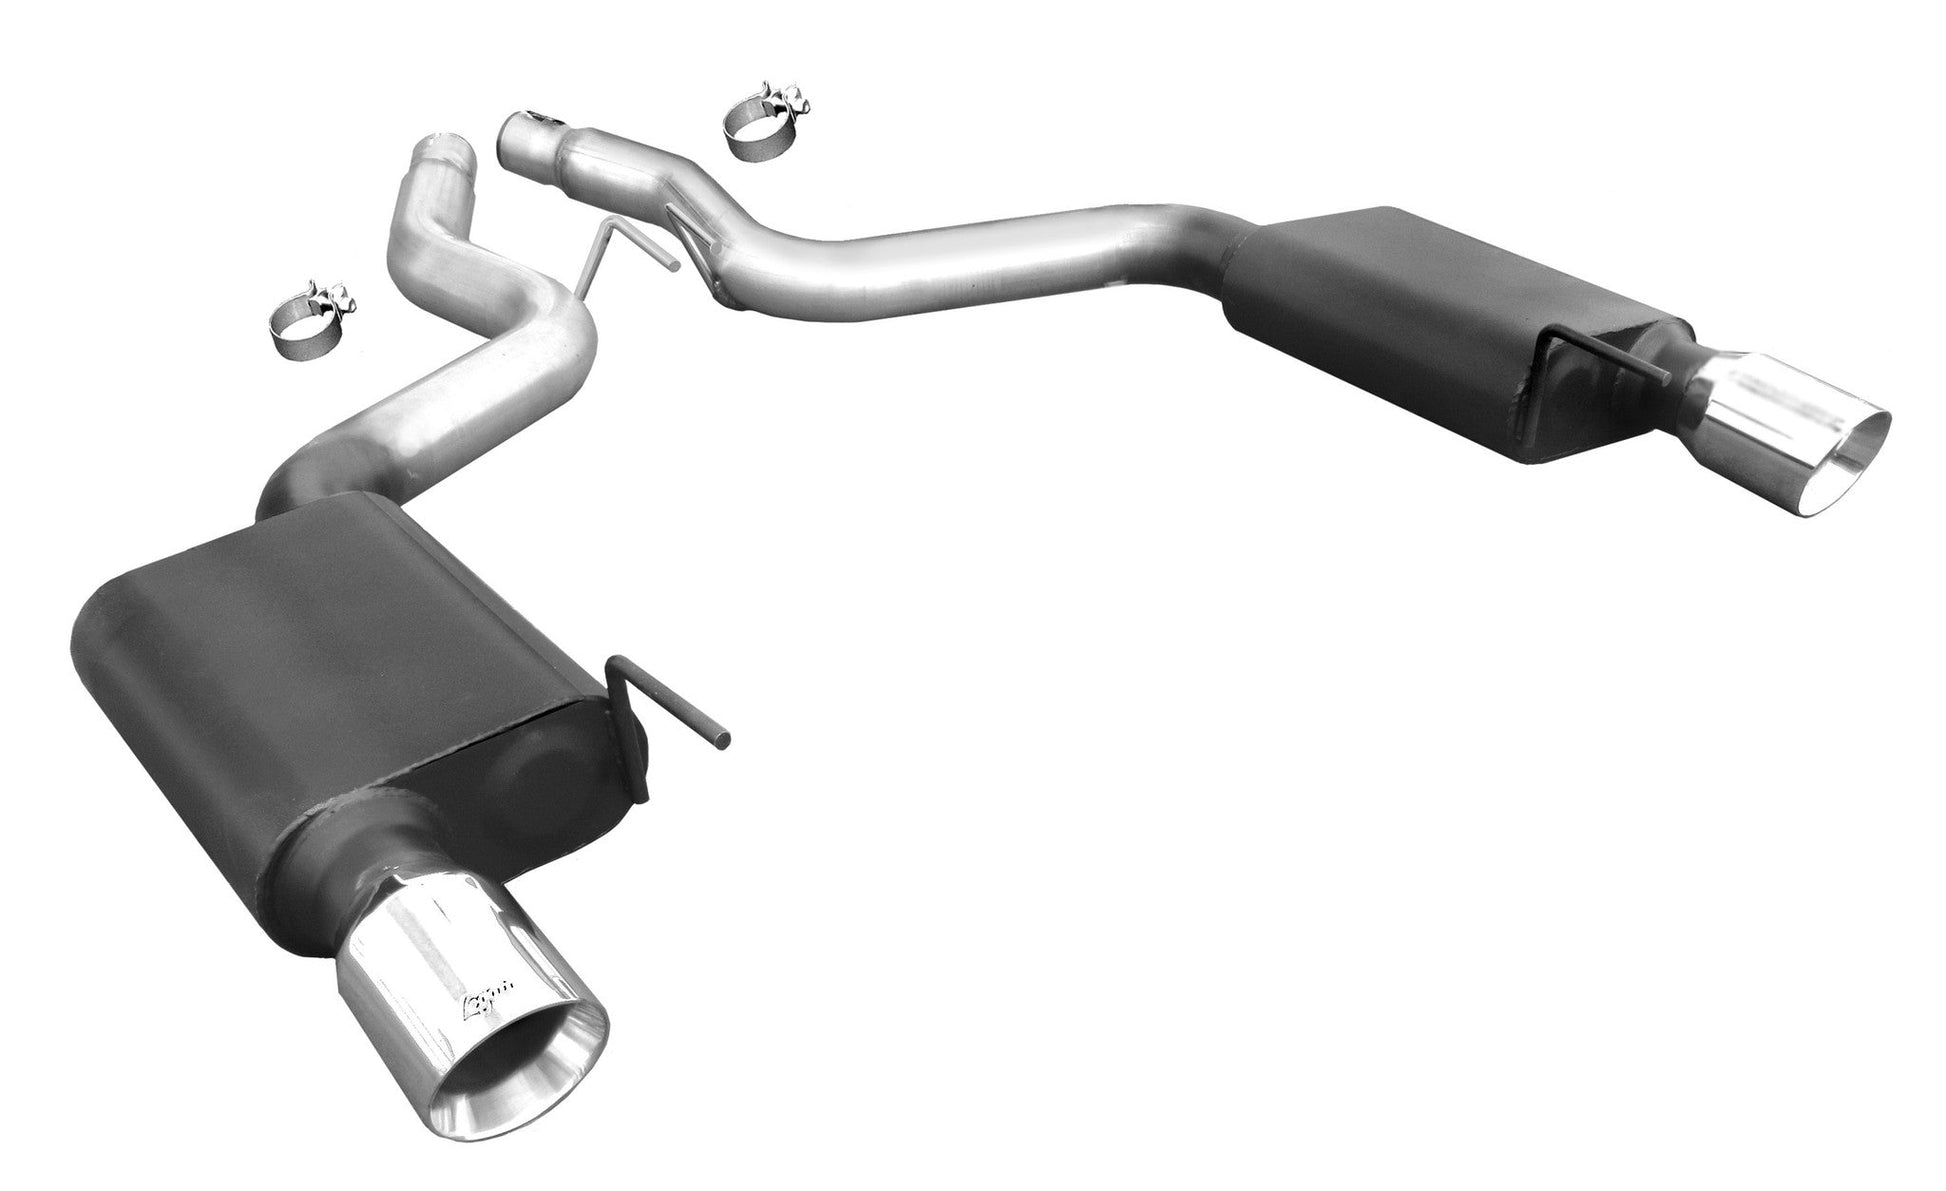 LEX4104 - Ford Mustang GT V8 Axle Back Exhaust 2015 - Professional Products